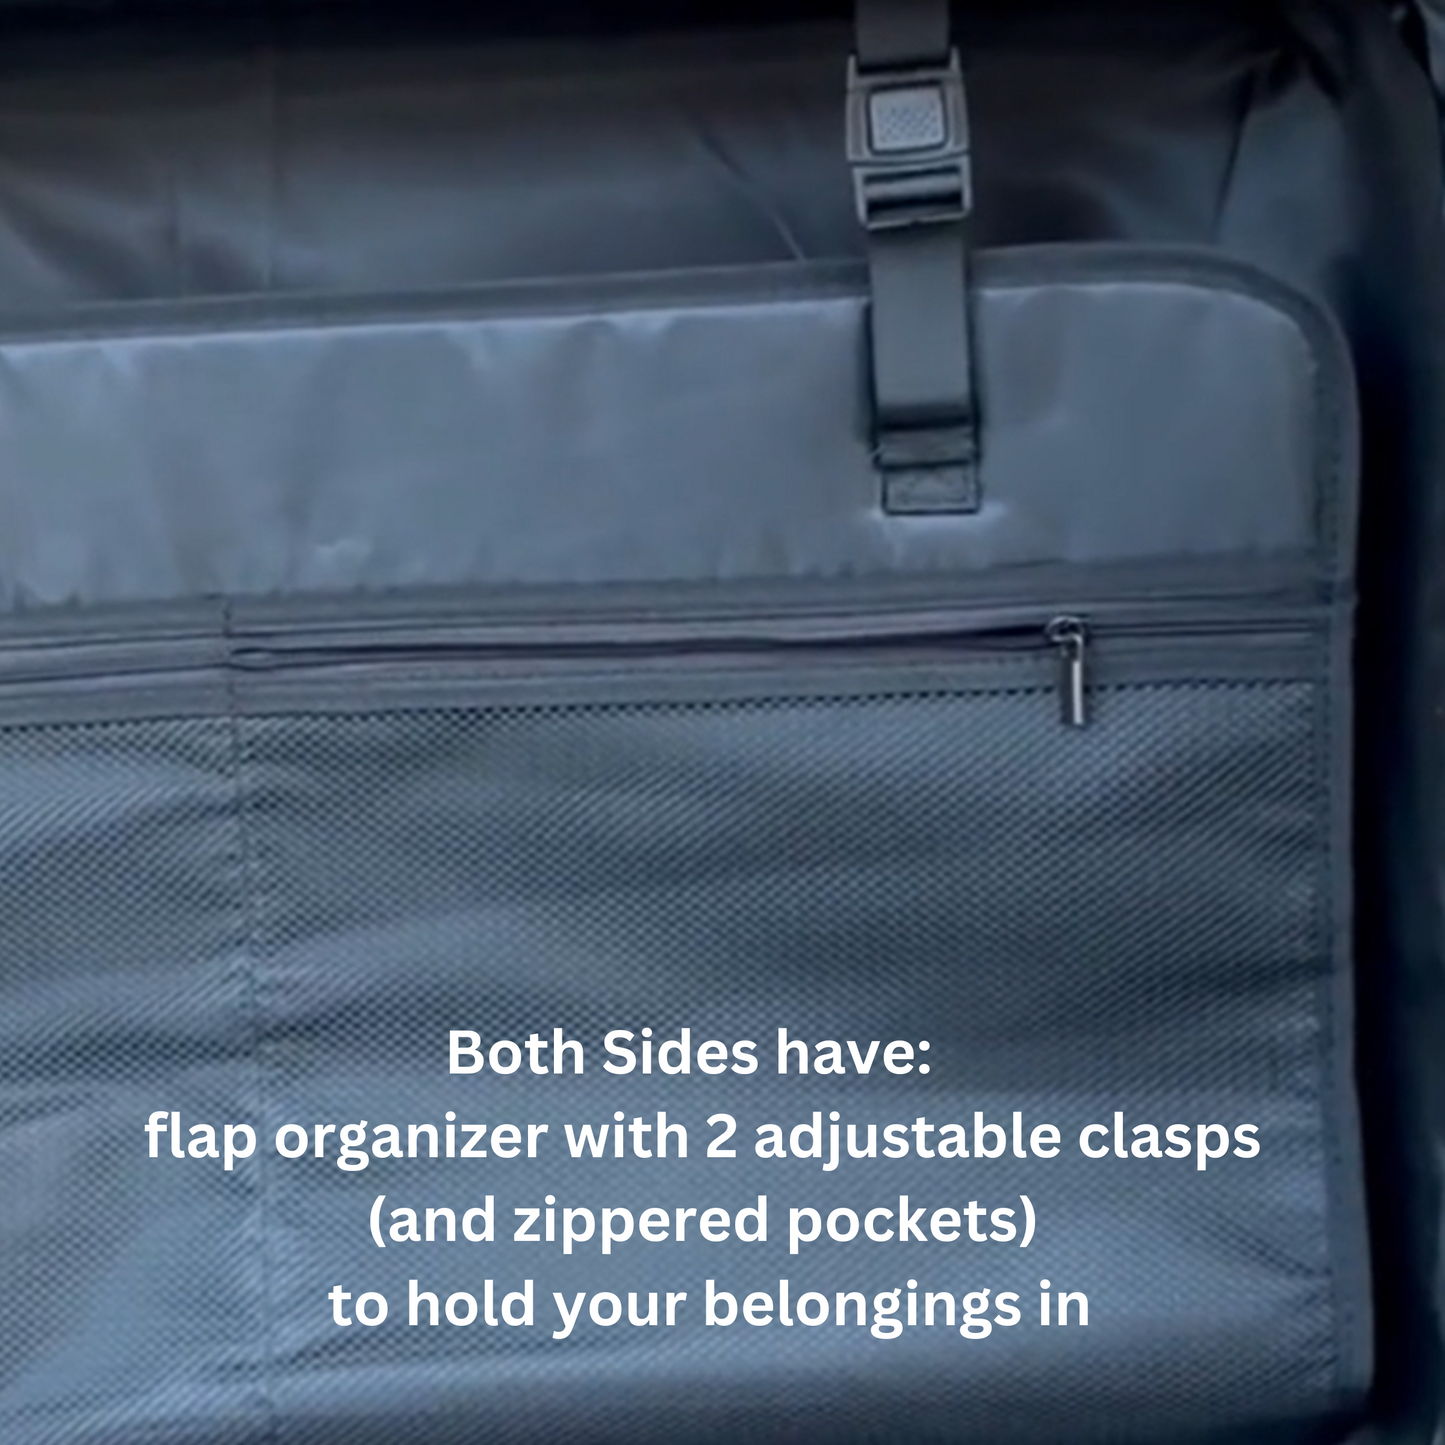 A close up view of the organizer with pockets to hold your belonging in.